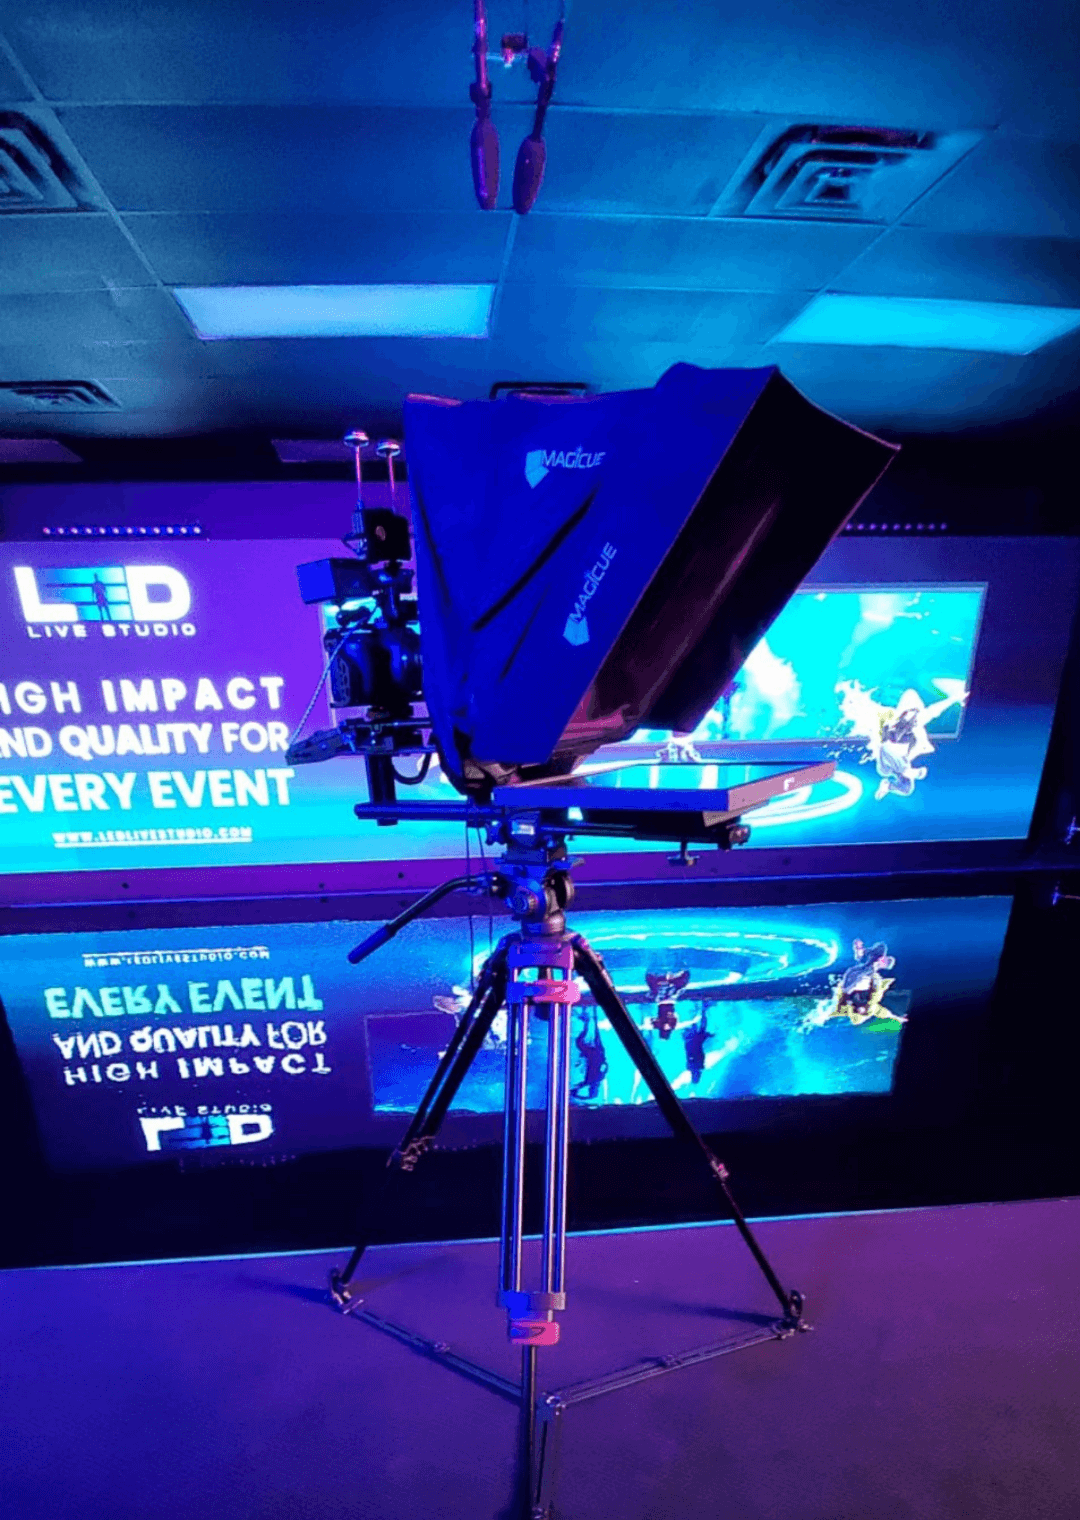 Video Rental Studio for Live Streaming Events